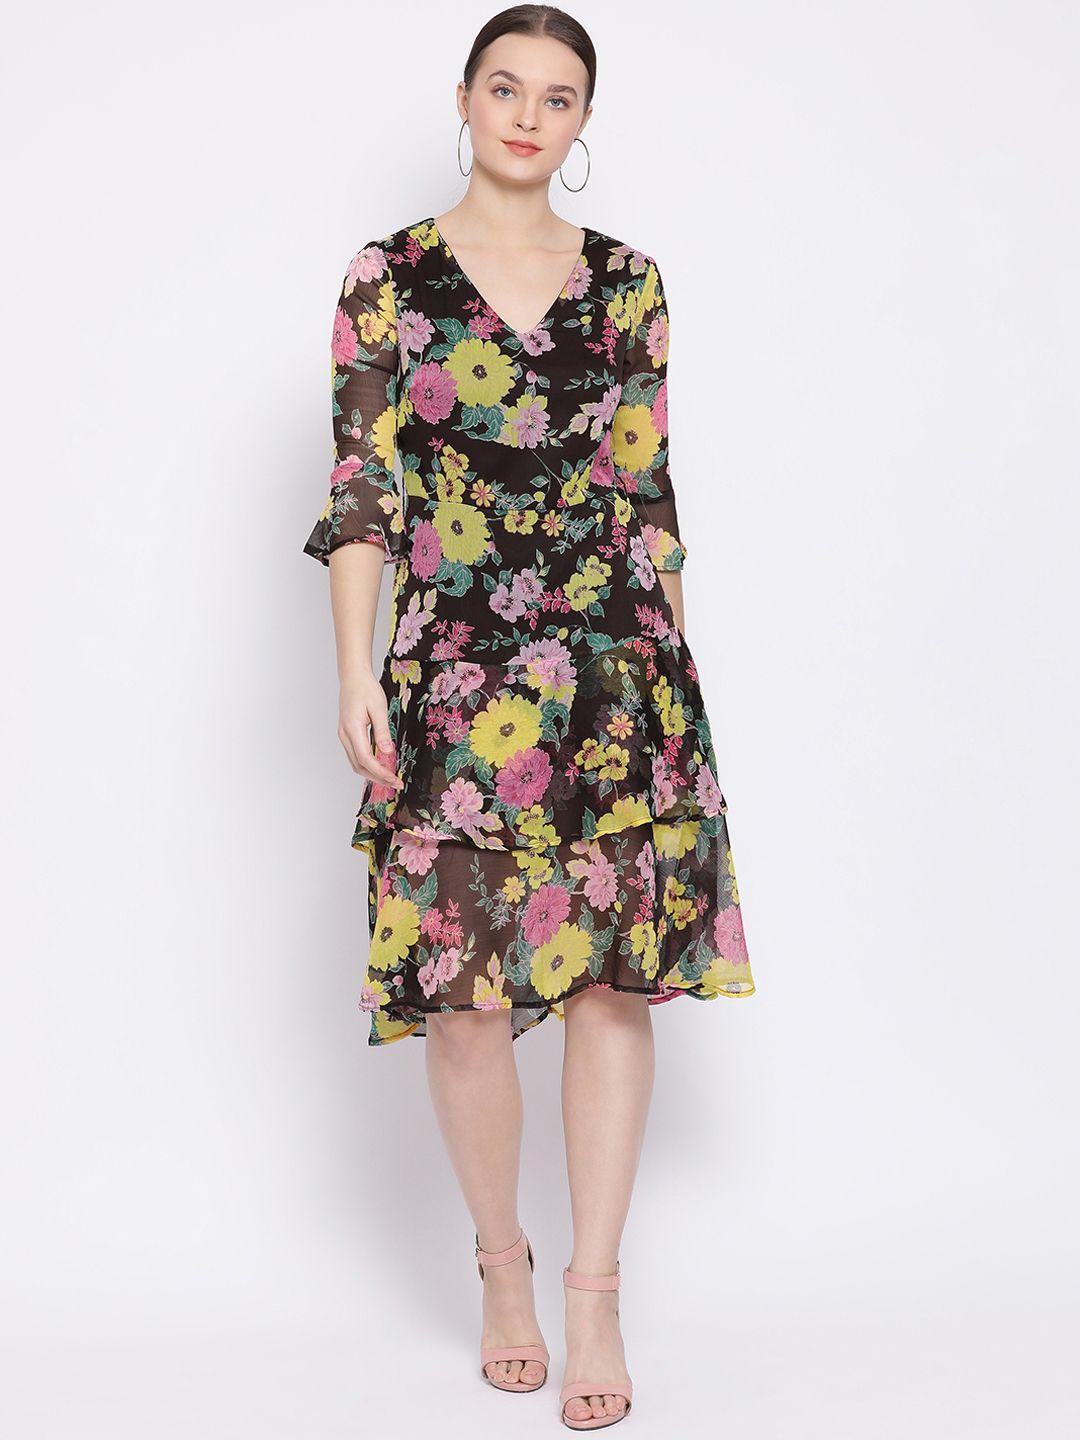 oxolloxo women black floral print fit and flare dress